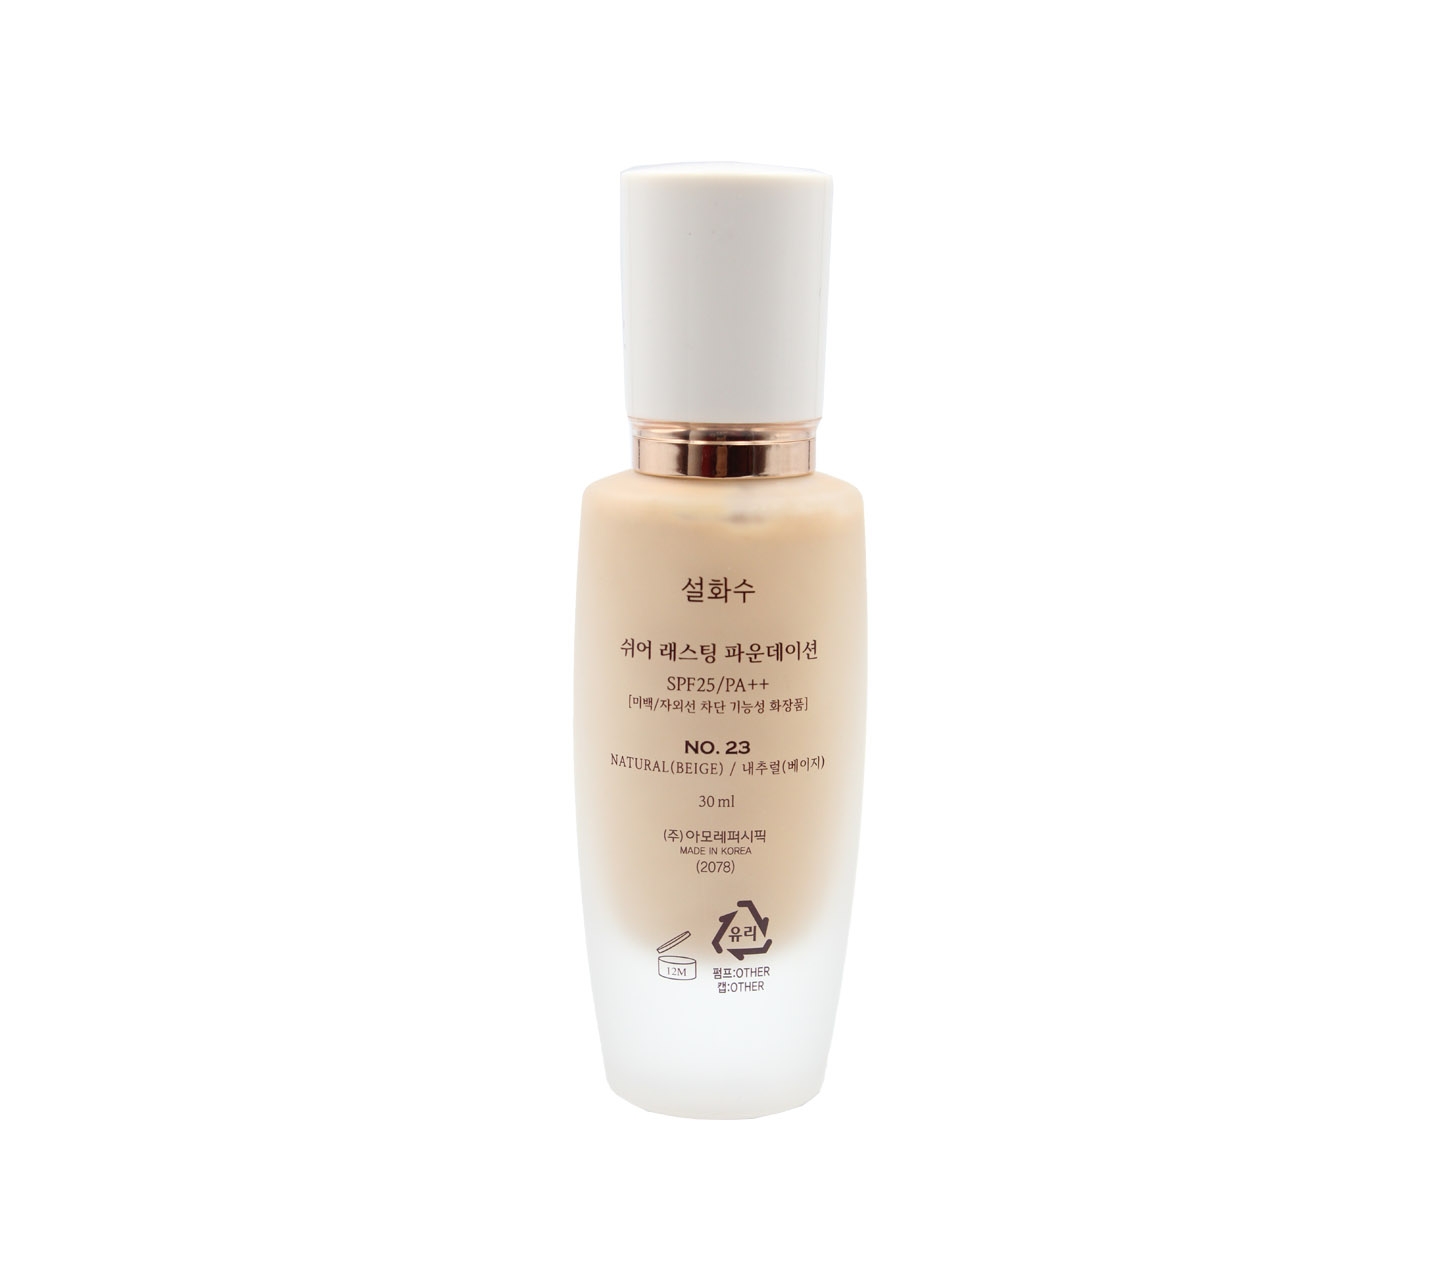 Sulwhasoo Sheer Lasting Foundation No.23 Natural (Beige) Faces